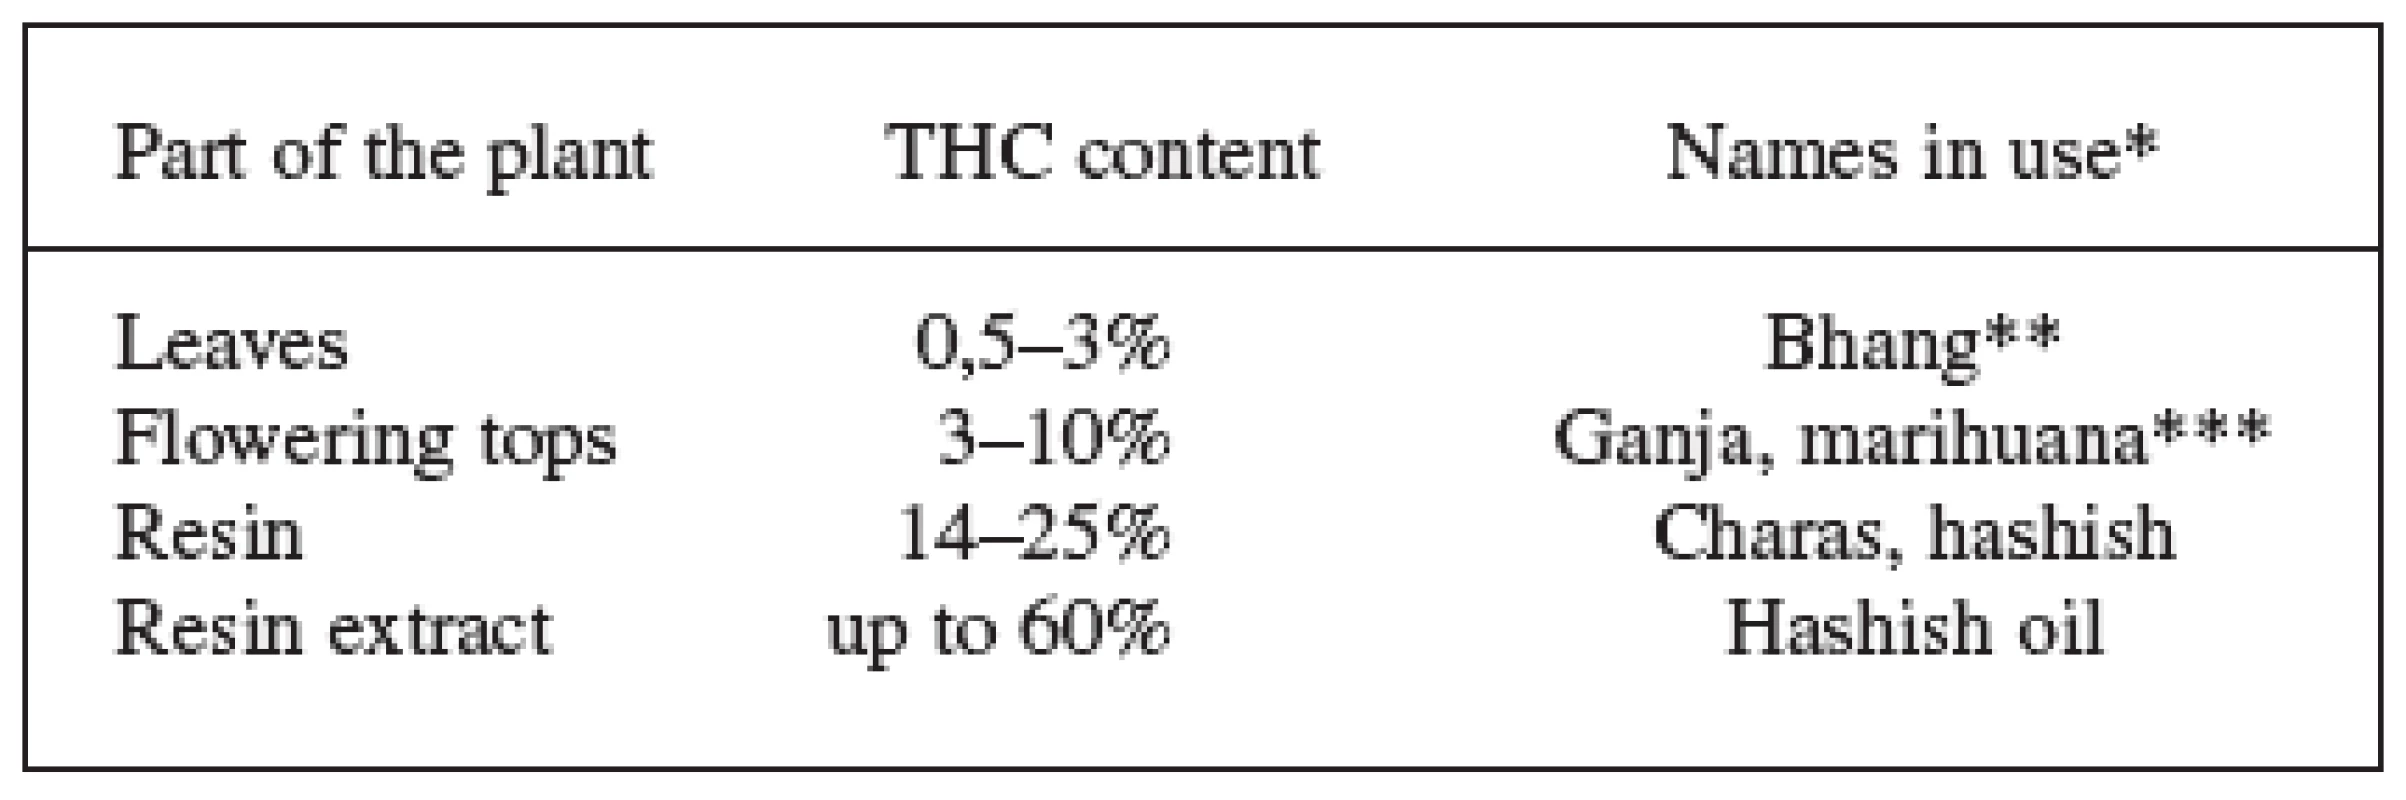 THC content in different parts of the plant and the names used 7, 9, 28, 68)